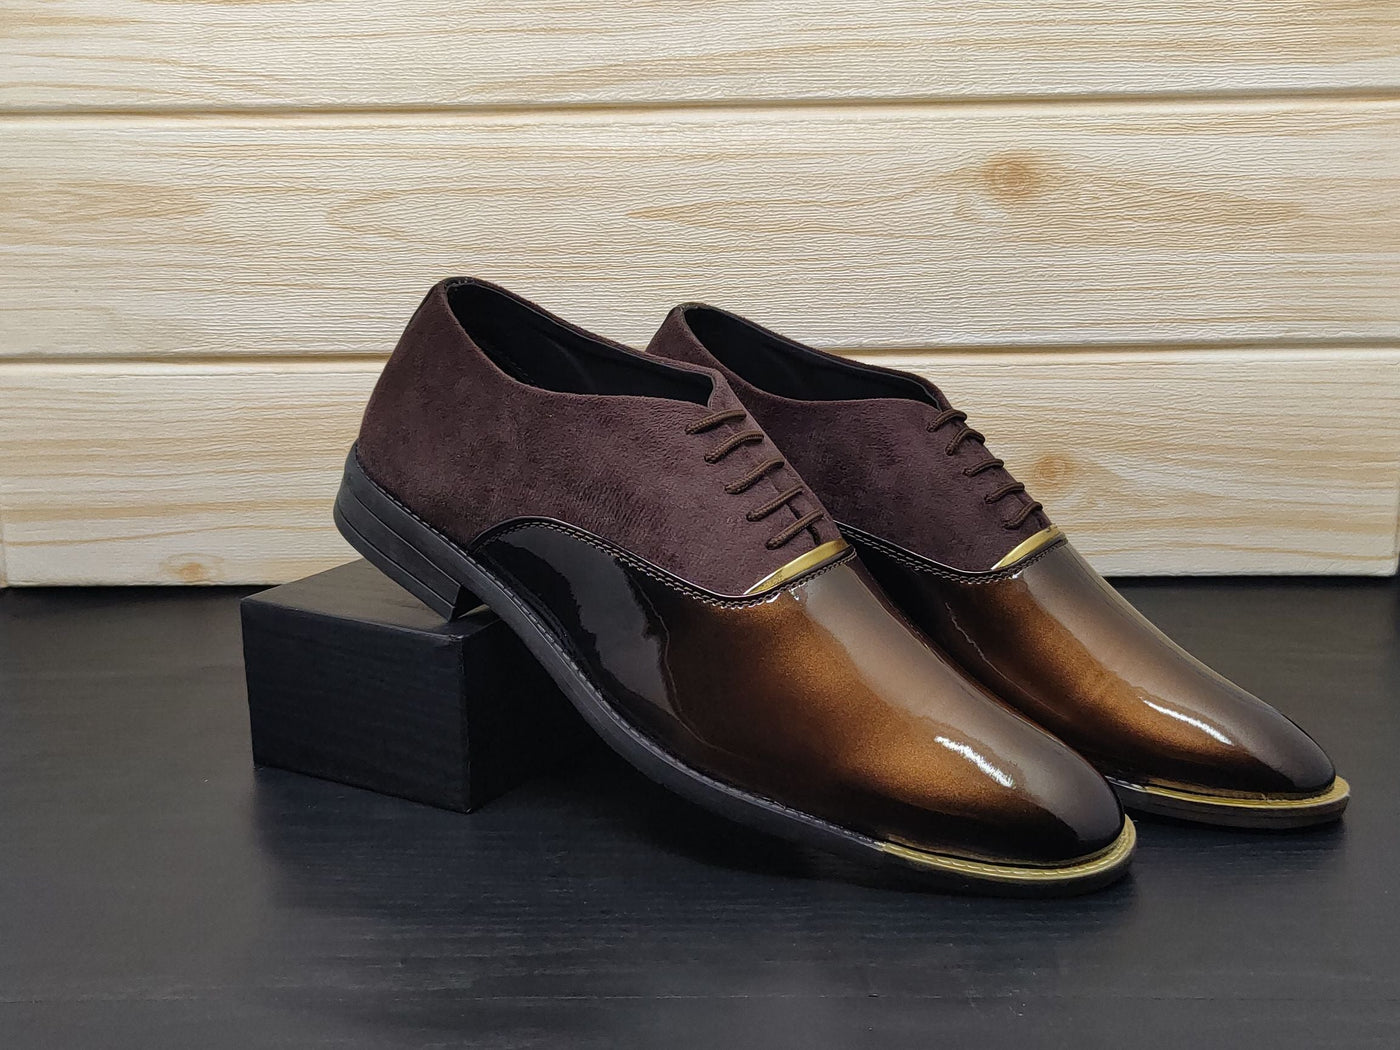 Men's Dark Brown Oxford Shoes for Wedding and Partywear-UniqueandClassy